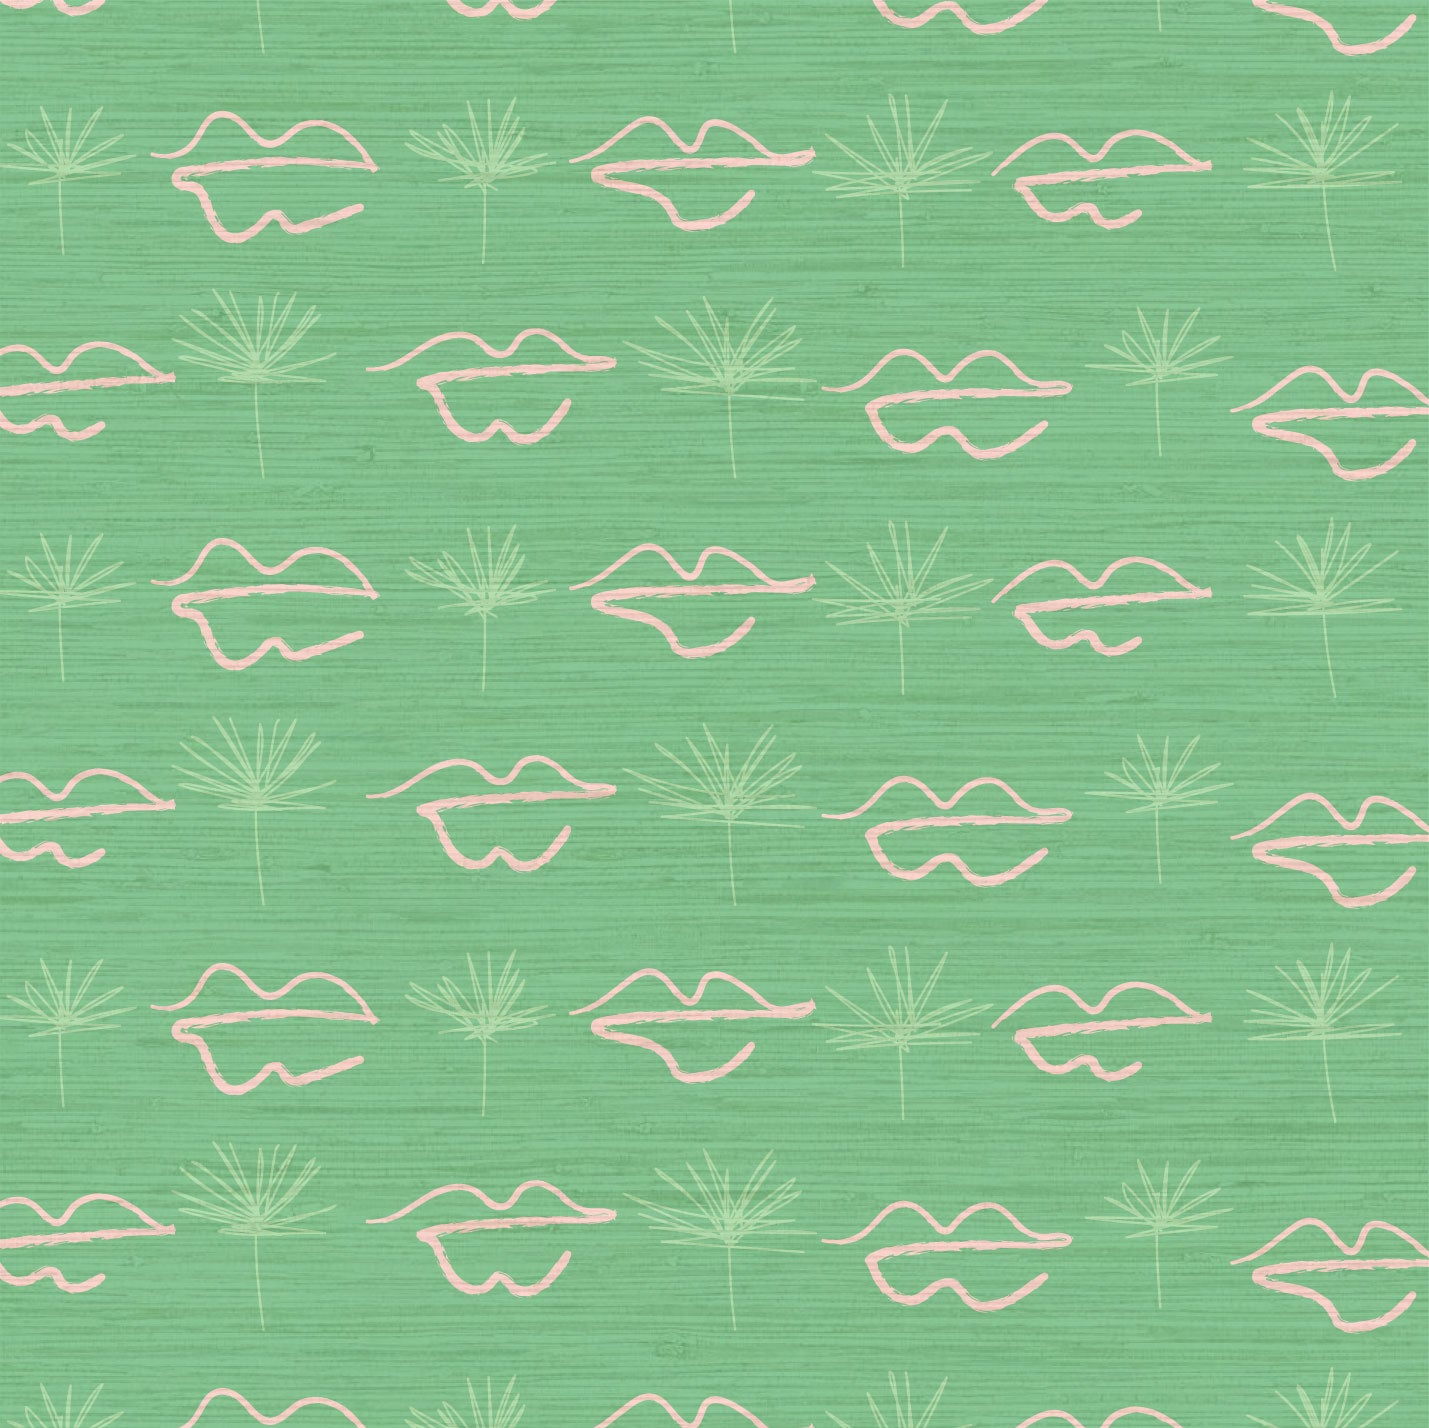 Grasscloth wallpaper Natural Textured Eco-Friendly Non-toxic High-quality Sustainable Interior Design Bold Custom Tailor-made Retro chic Bold Salon Beauty lips Botox jungle bold stripe lips jungle tropical makeup pink green teal palm tree